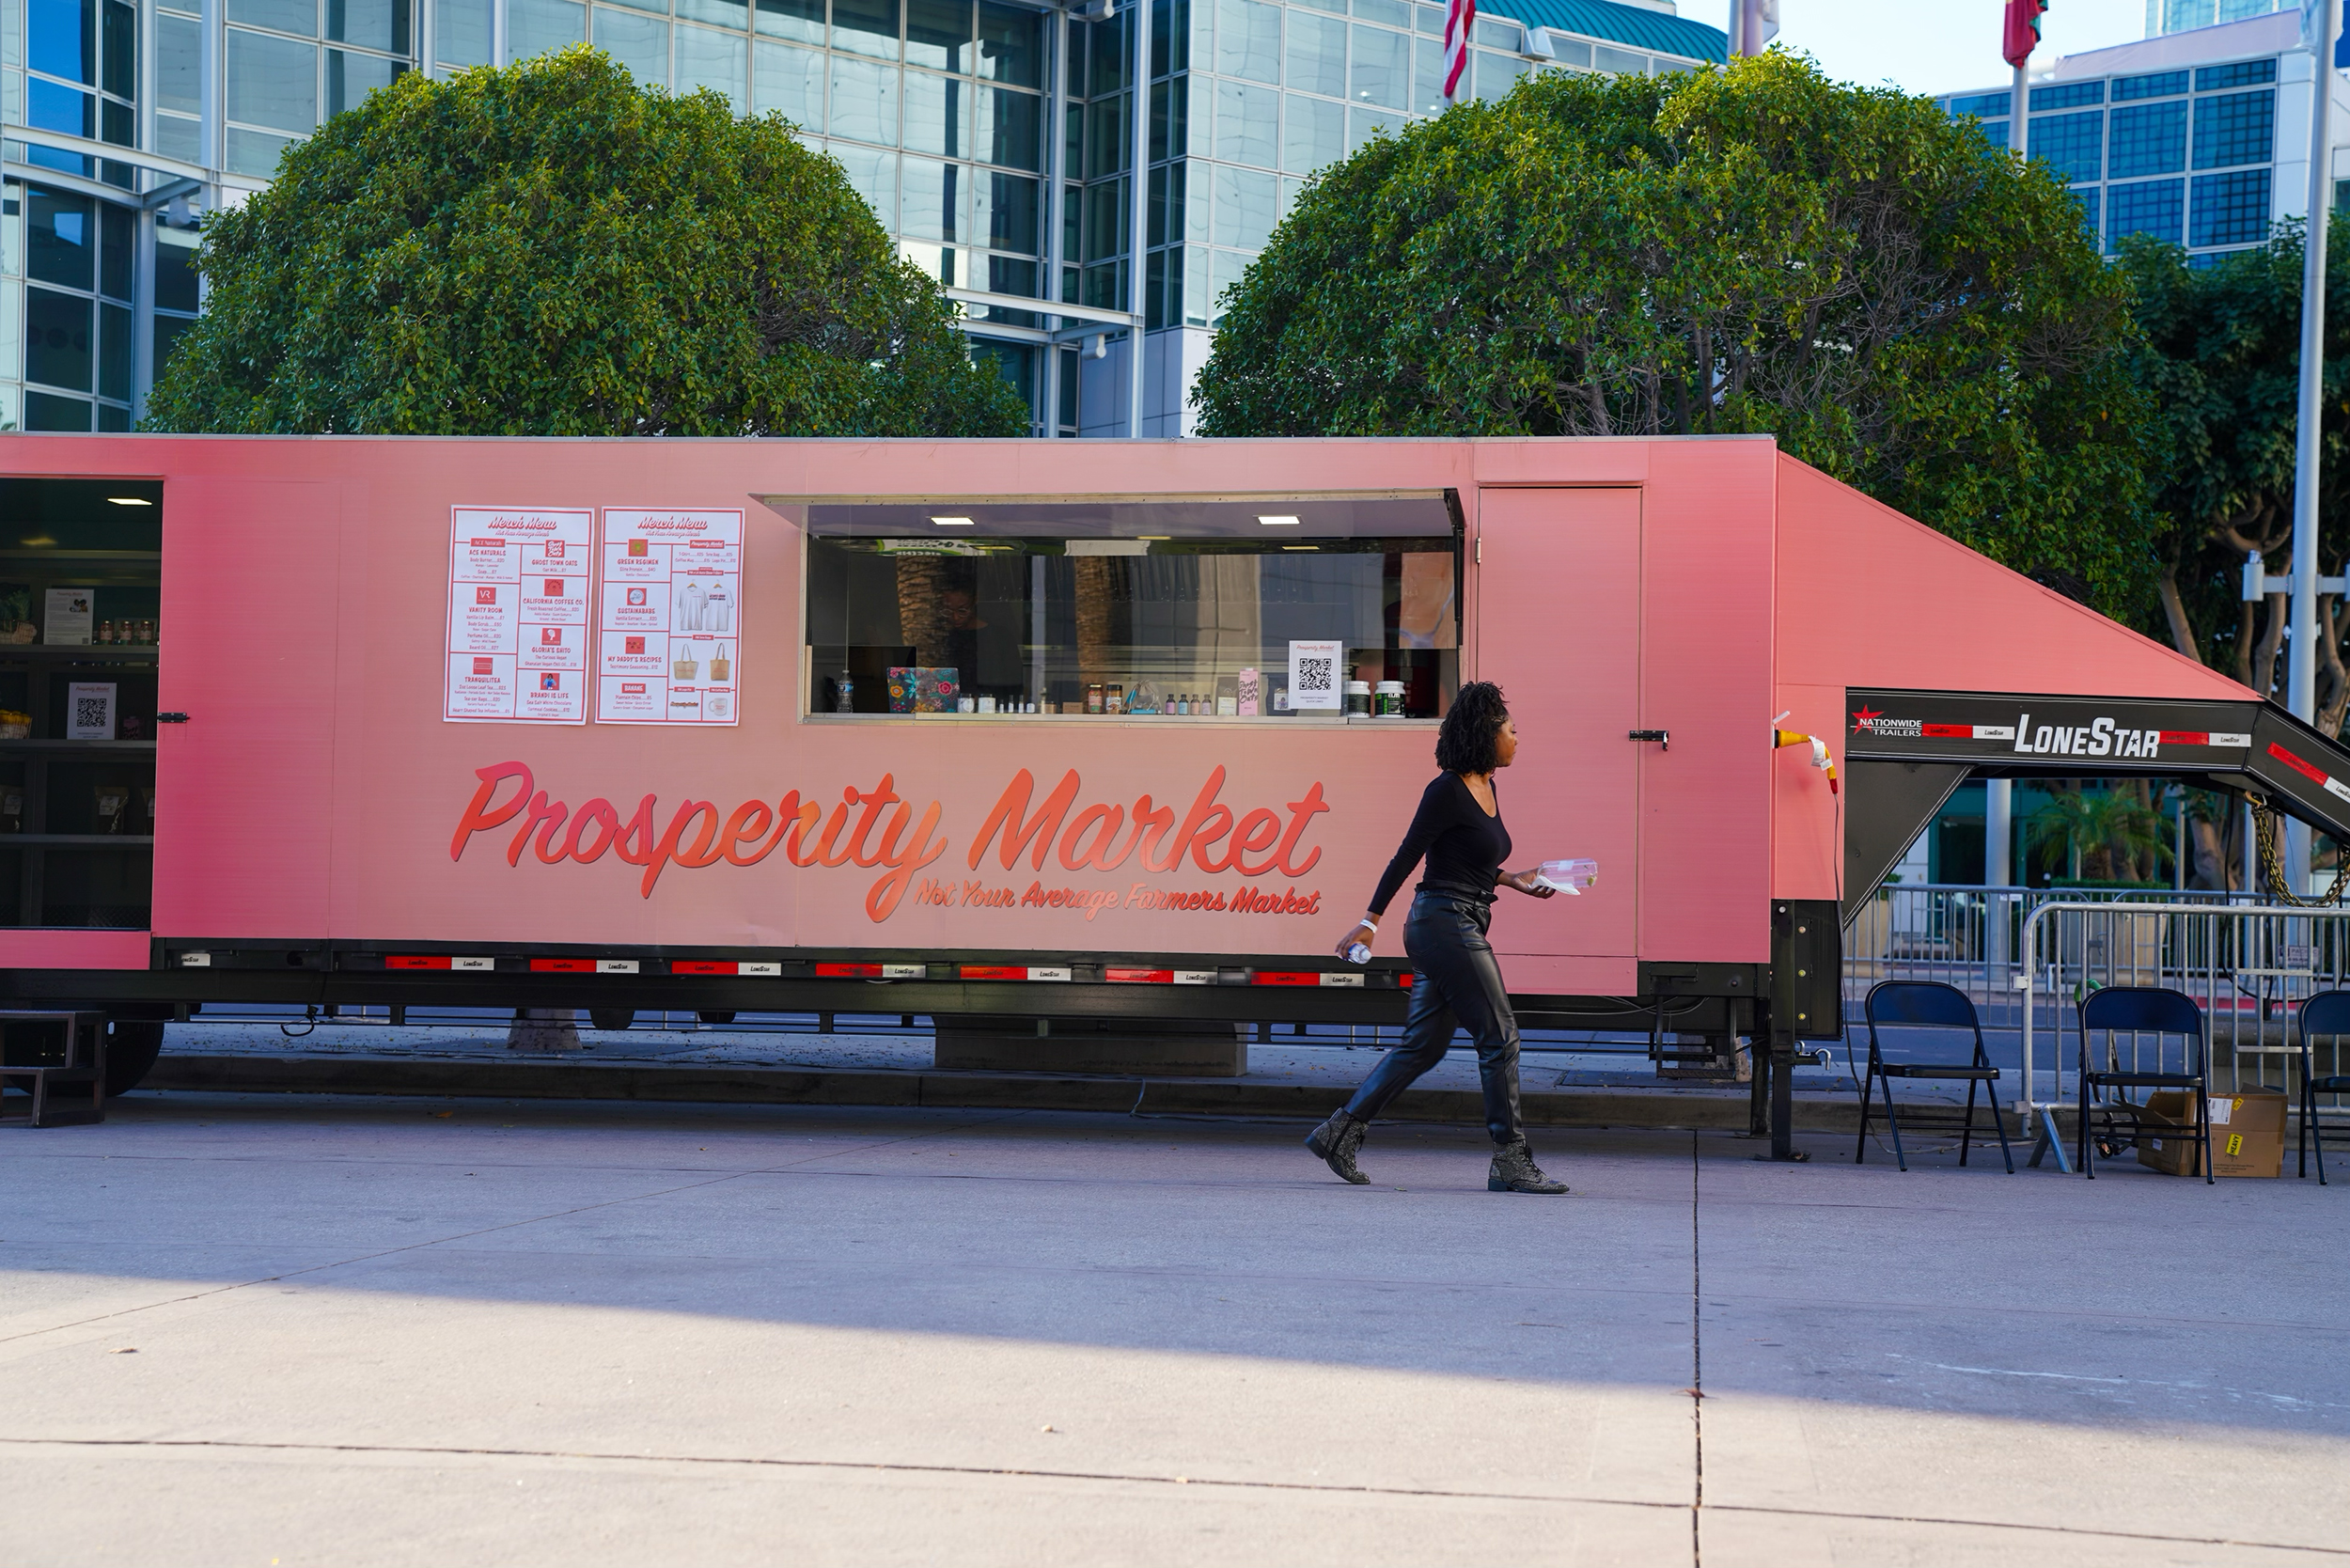 A Black woman walks in front of a pink mobile trailer which has the words “Prosperity Market” written alongside the bottom half of the trailer.